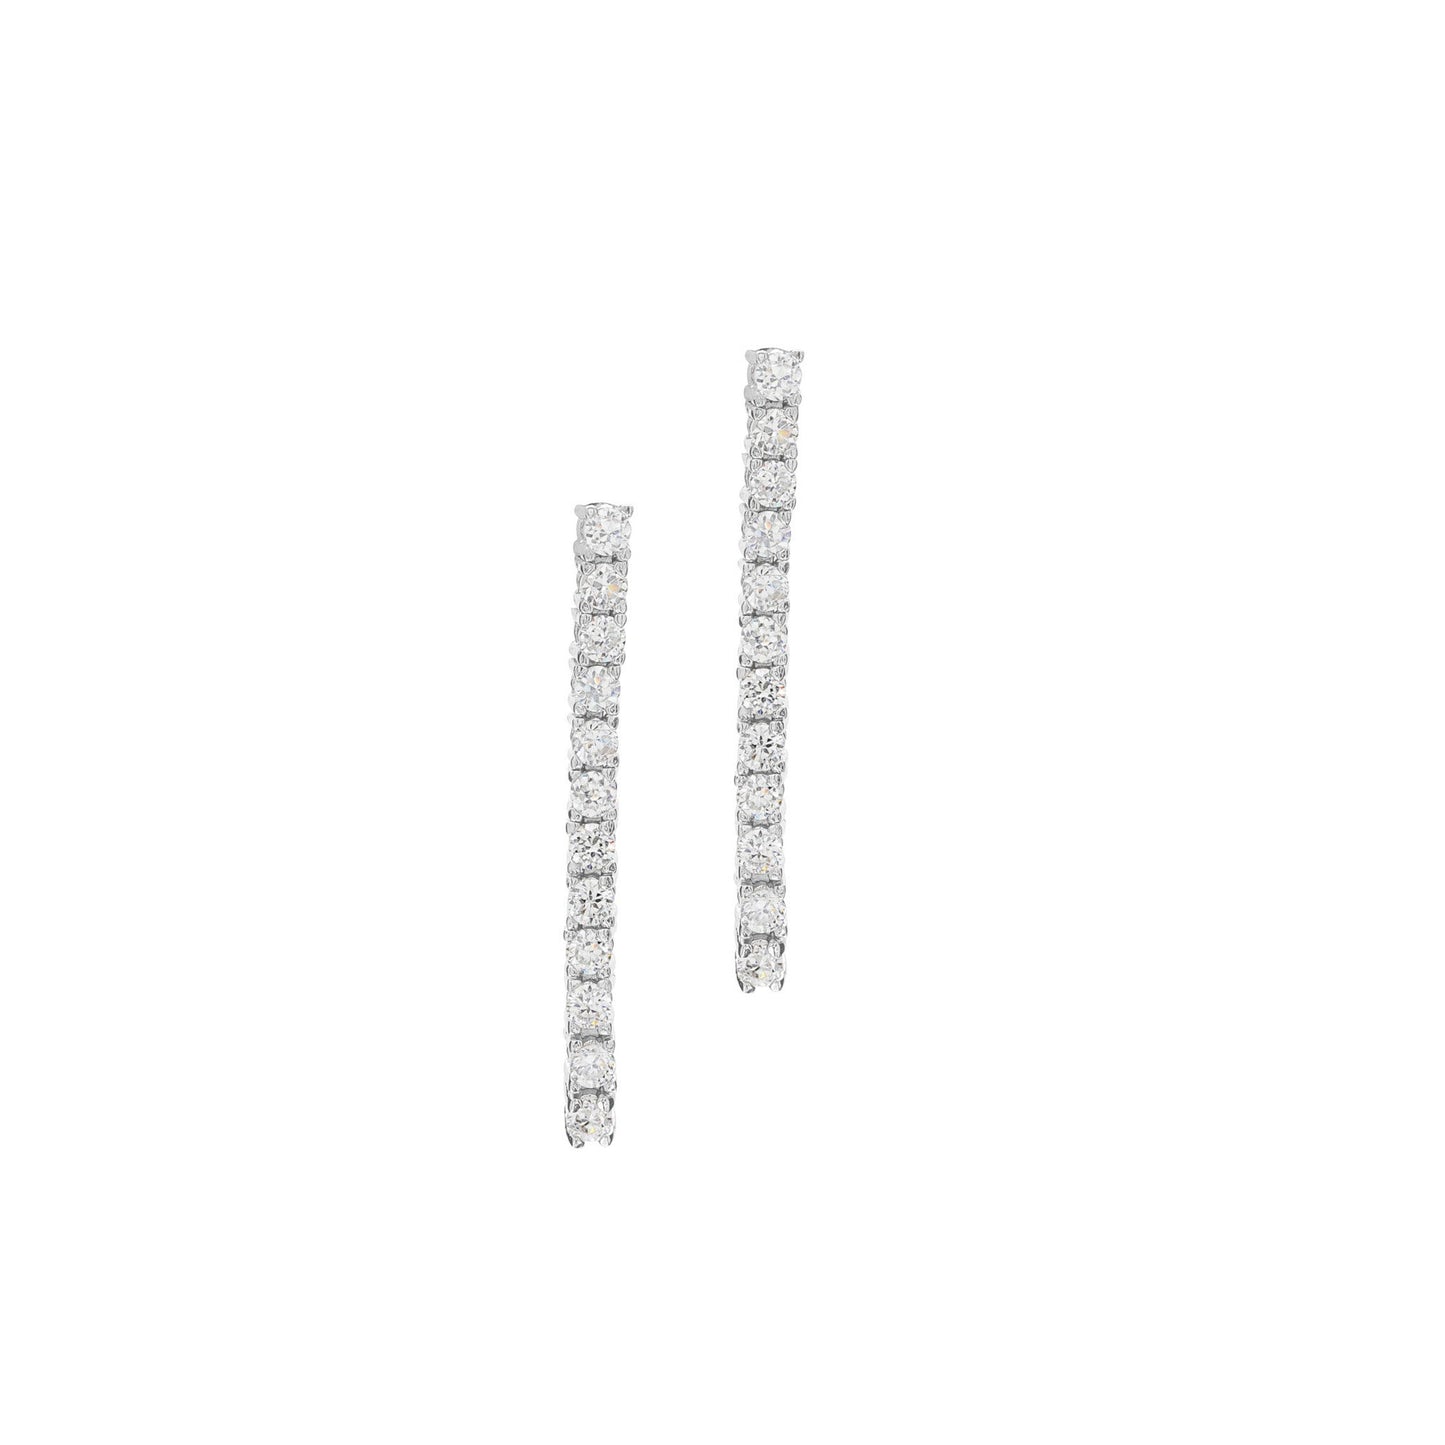 A simulated diamond drop earrings displayed on a neutral white background.